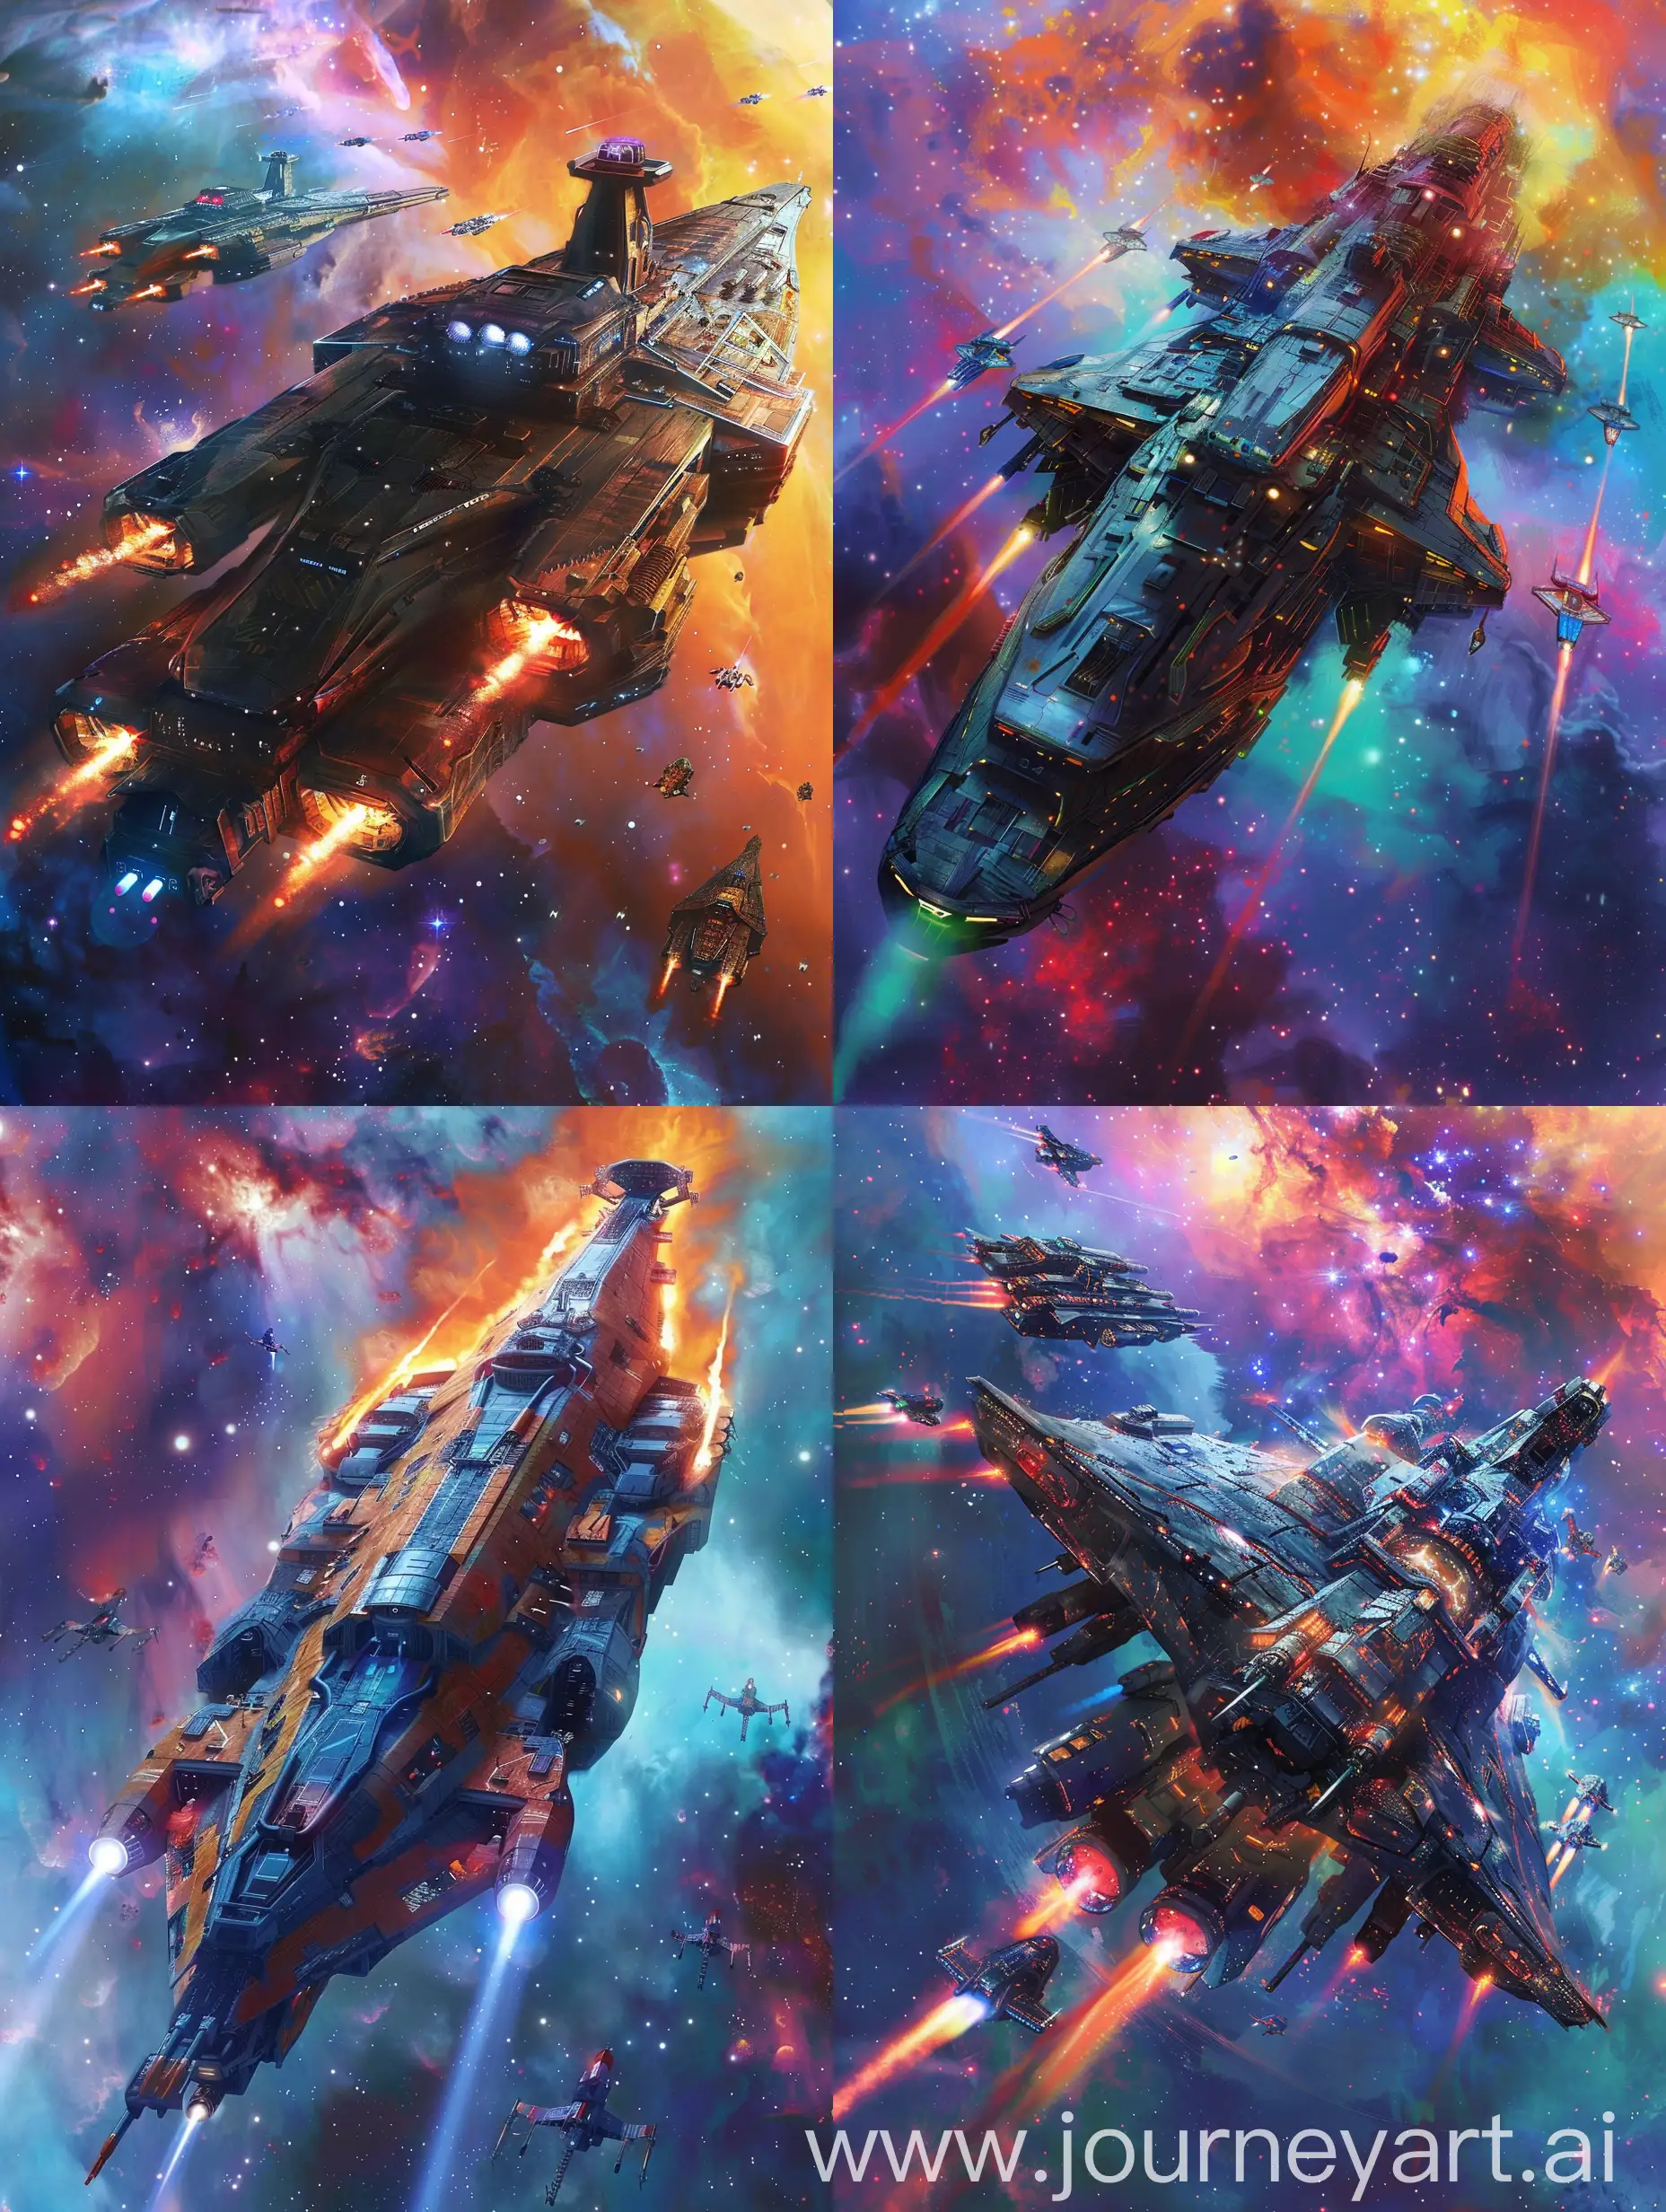 Galactic-Battlefront-Capital-Ships-and-Starfighters-in-Vibrant-Nebula-Docking-Bay